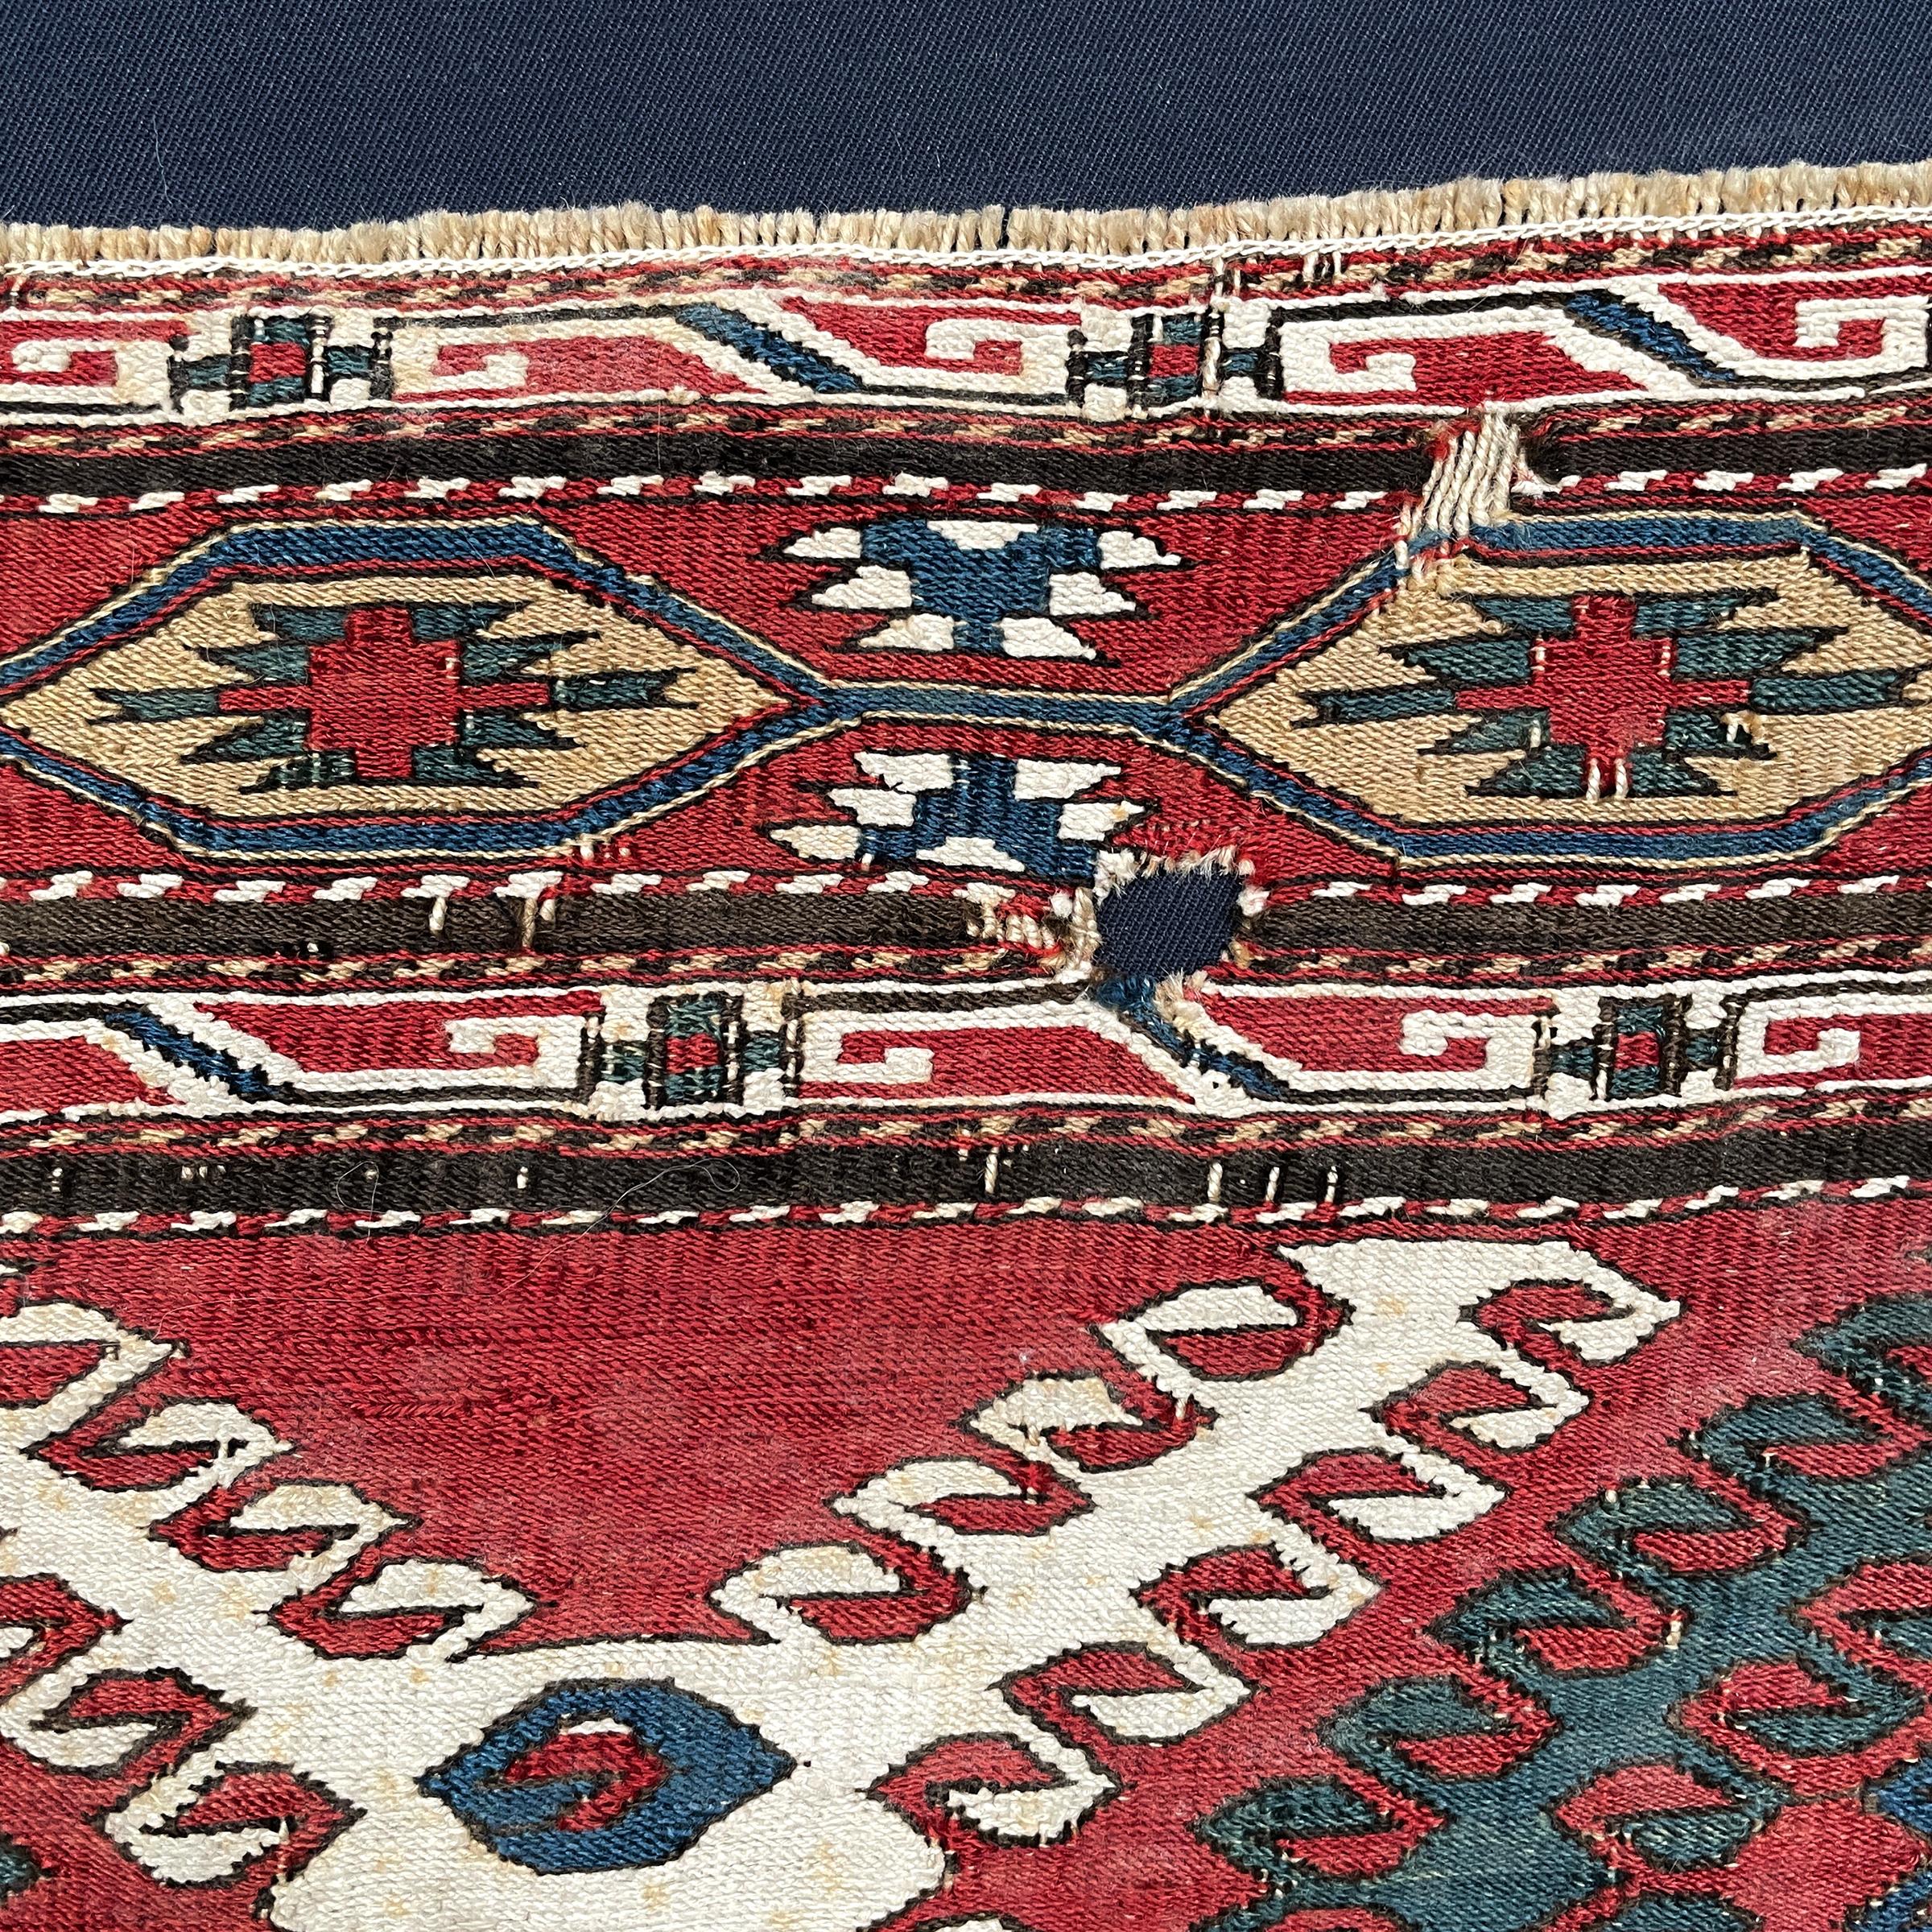 Mounted Early 20th Century Soumak Rug Fragment For Sale 2